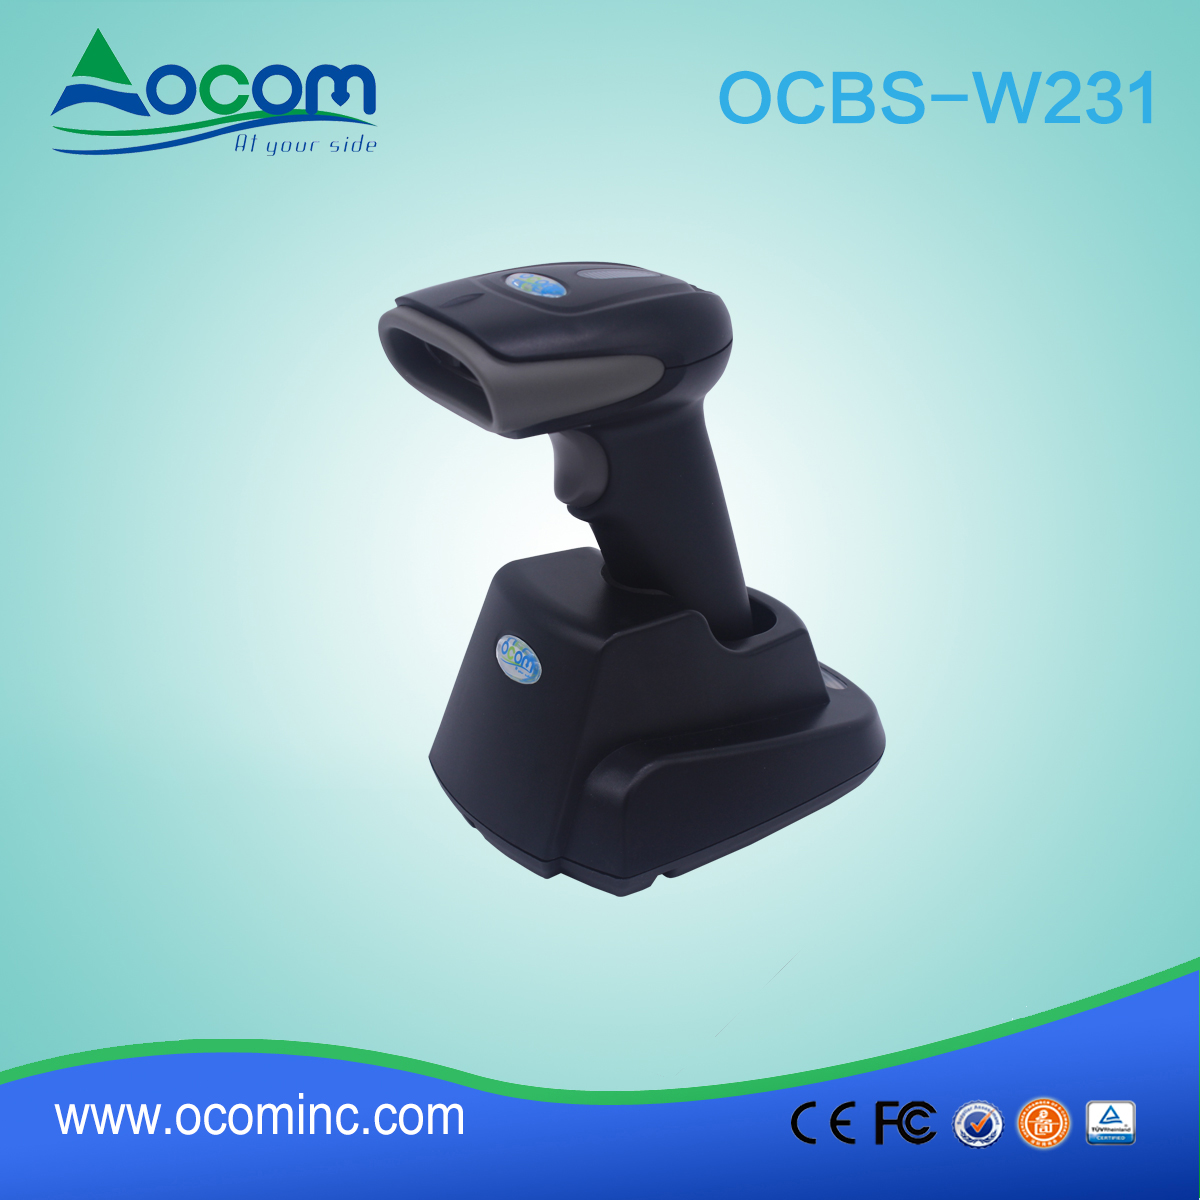 (OCBS-W231) Manuale scanner barcode 2D con supporto